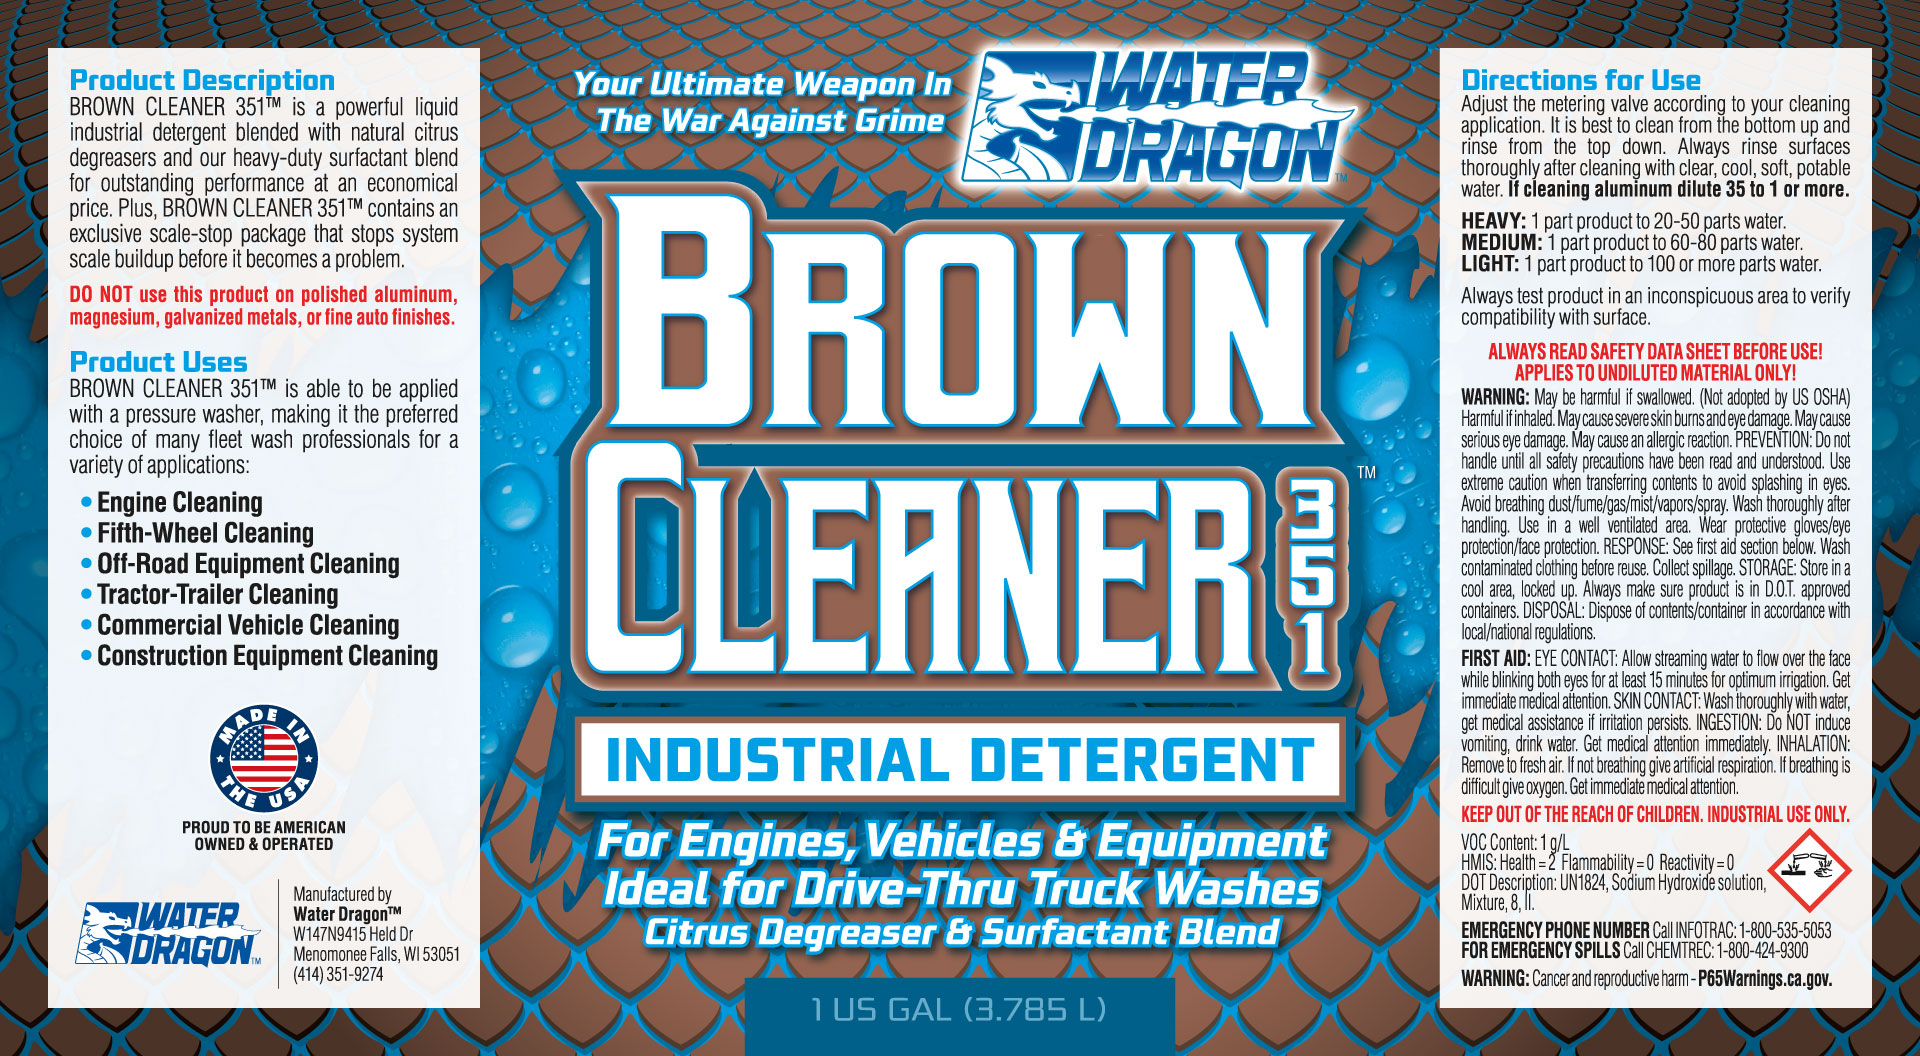 Water Dragon Brown Cleaner